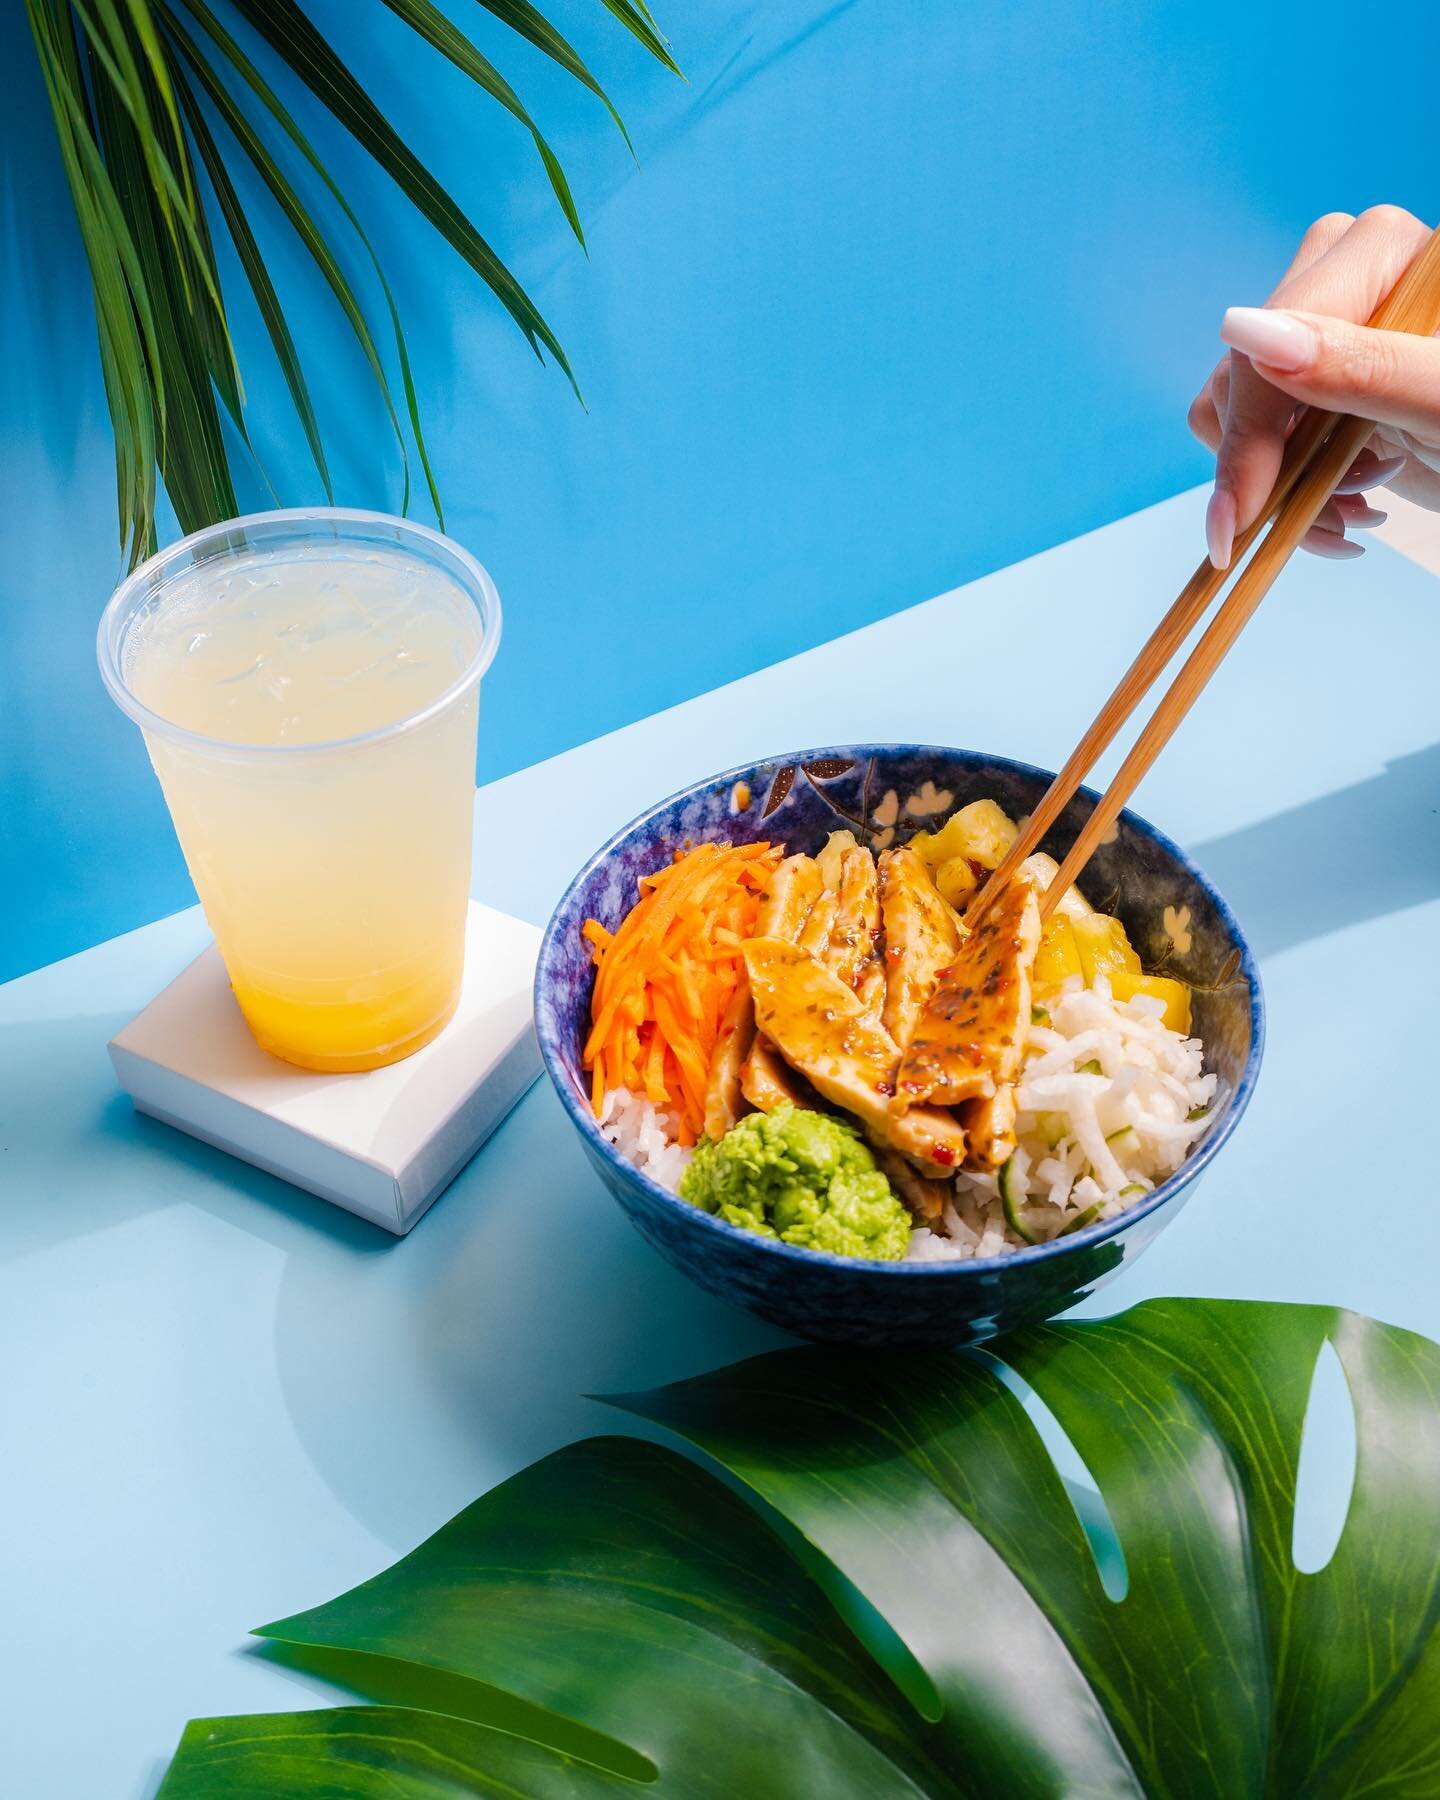 OH CLUCK!
Loaded with crunchy veg and tender chicken breast our Sweet Shoyu Chicken bowl is a summer-perfect pick.

#dishedvan #yvreats #dishedyyc #eater #feedfeed #yyc #yvr